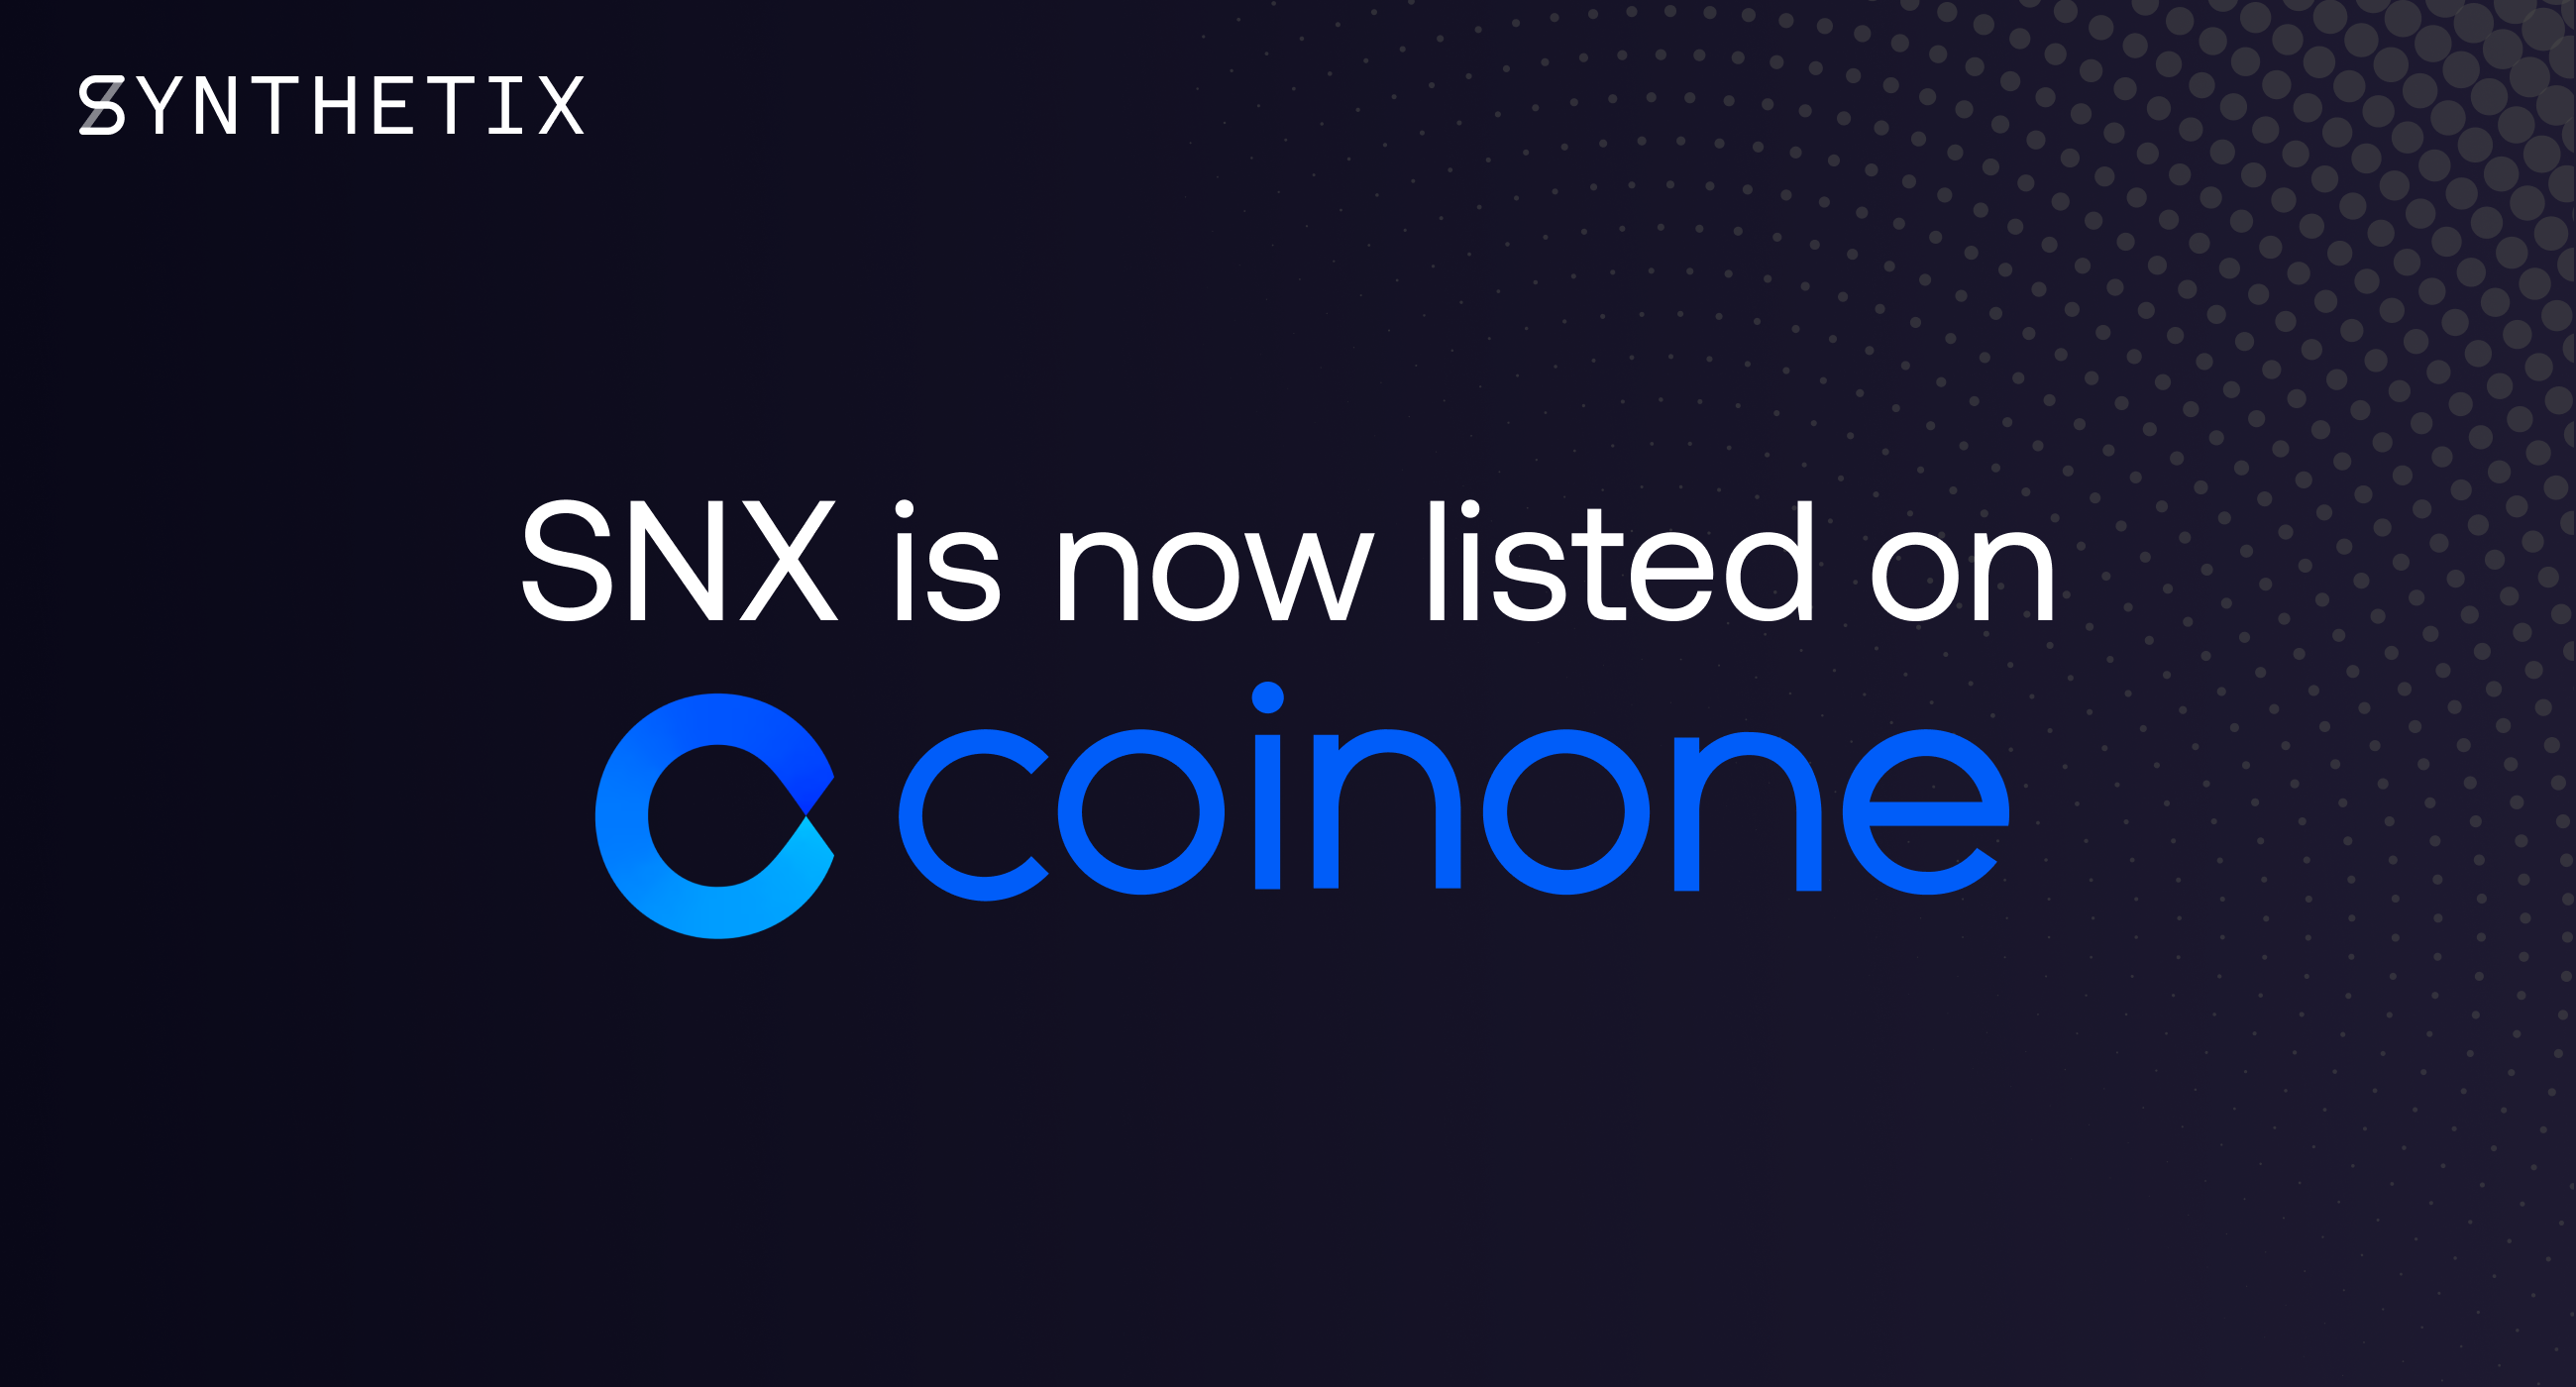 SNX is now listed on Coinone!